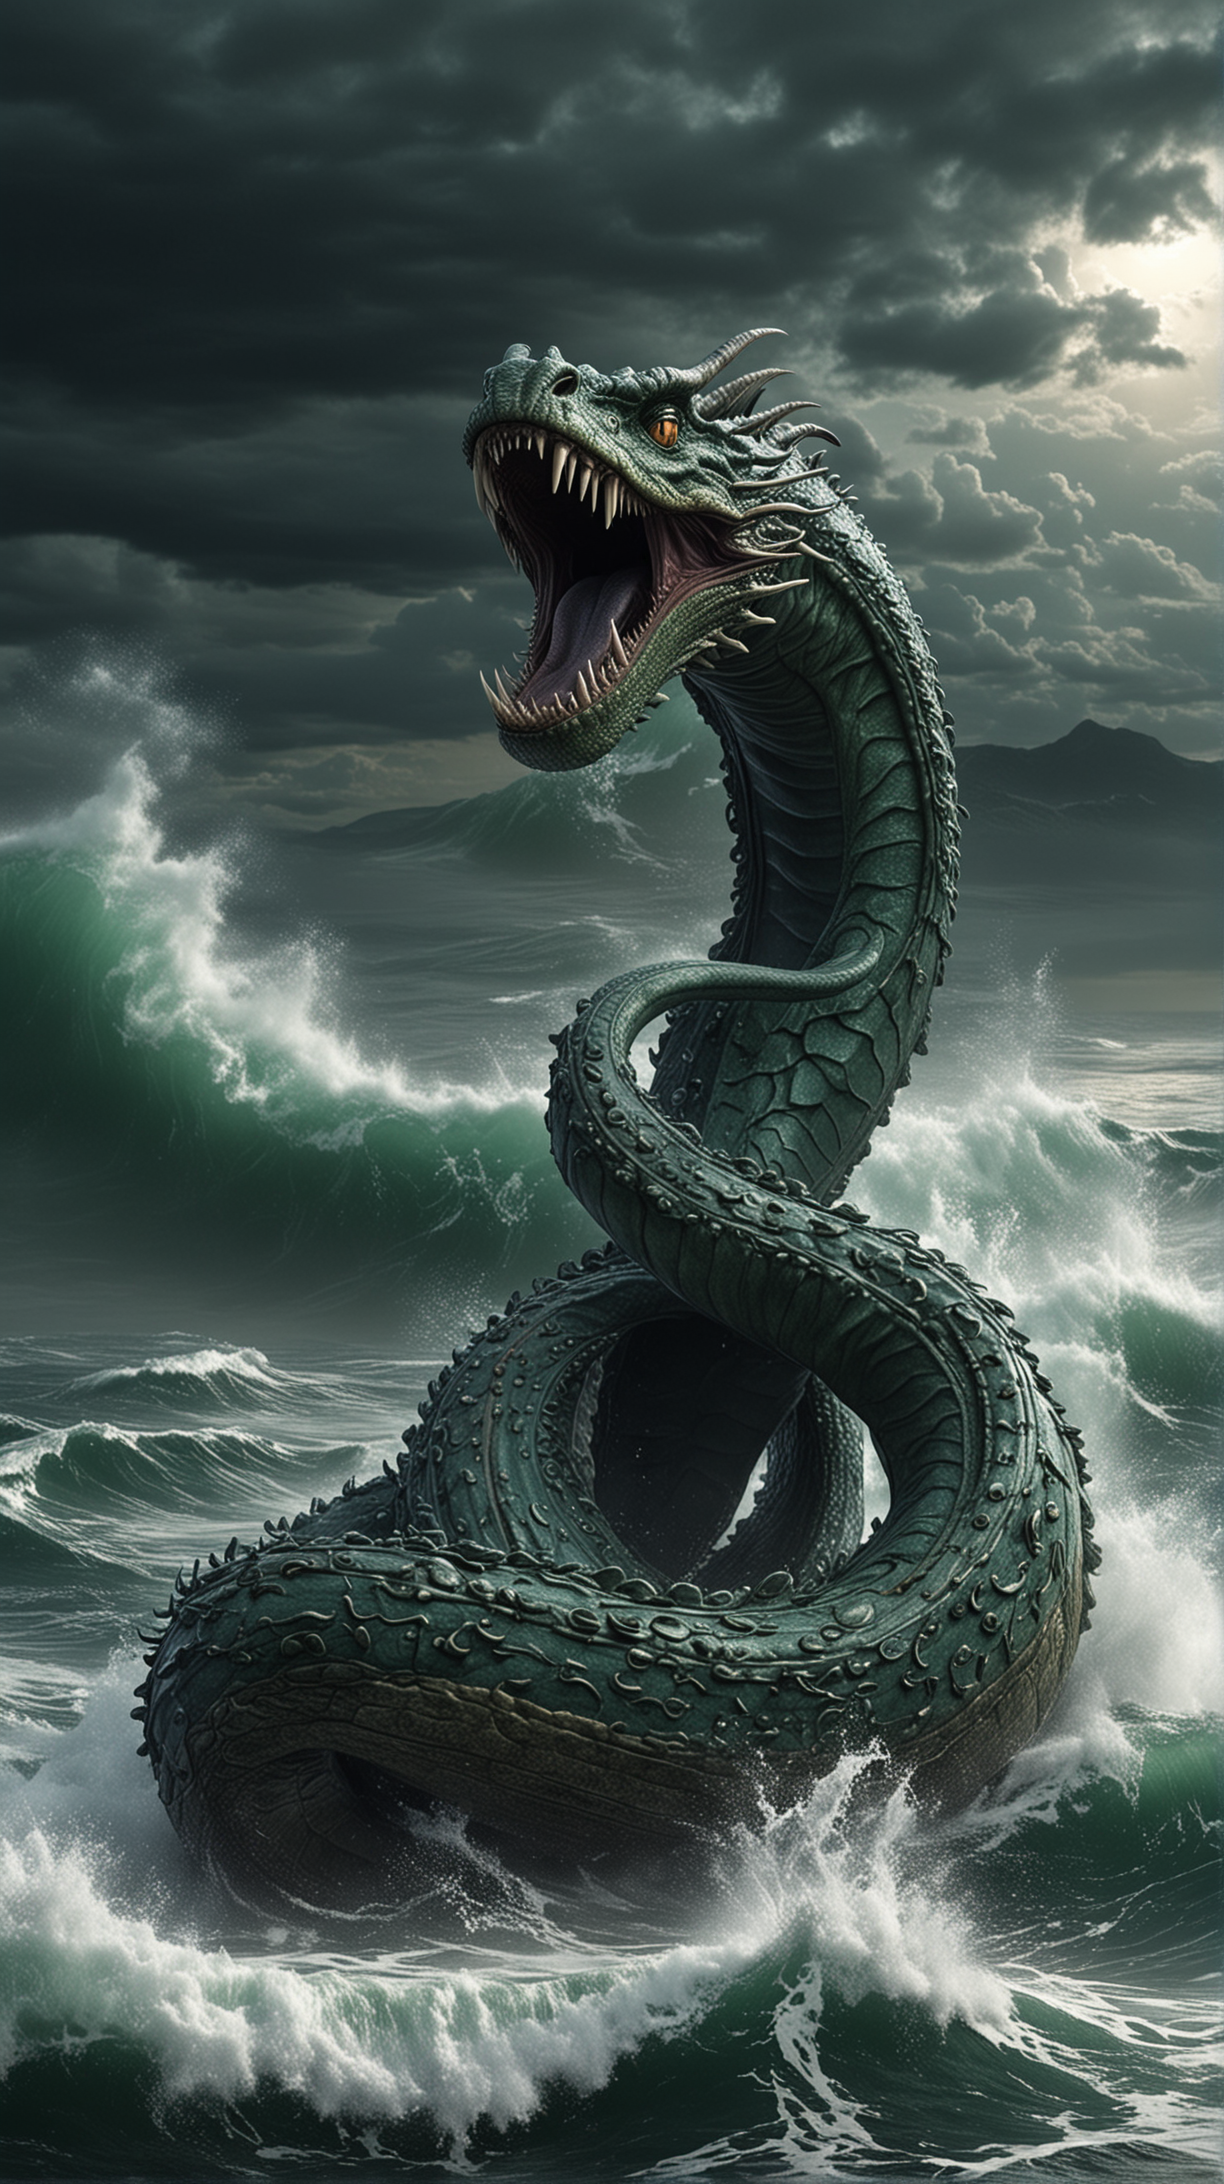 Leviathan, as a lovecraftian sea demon snake charackter, storm sea on background, hyper-realistic, photo-realistic